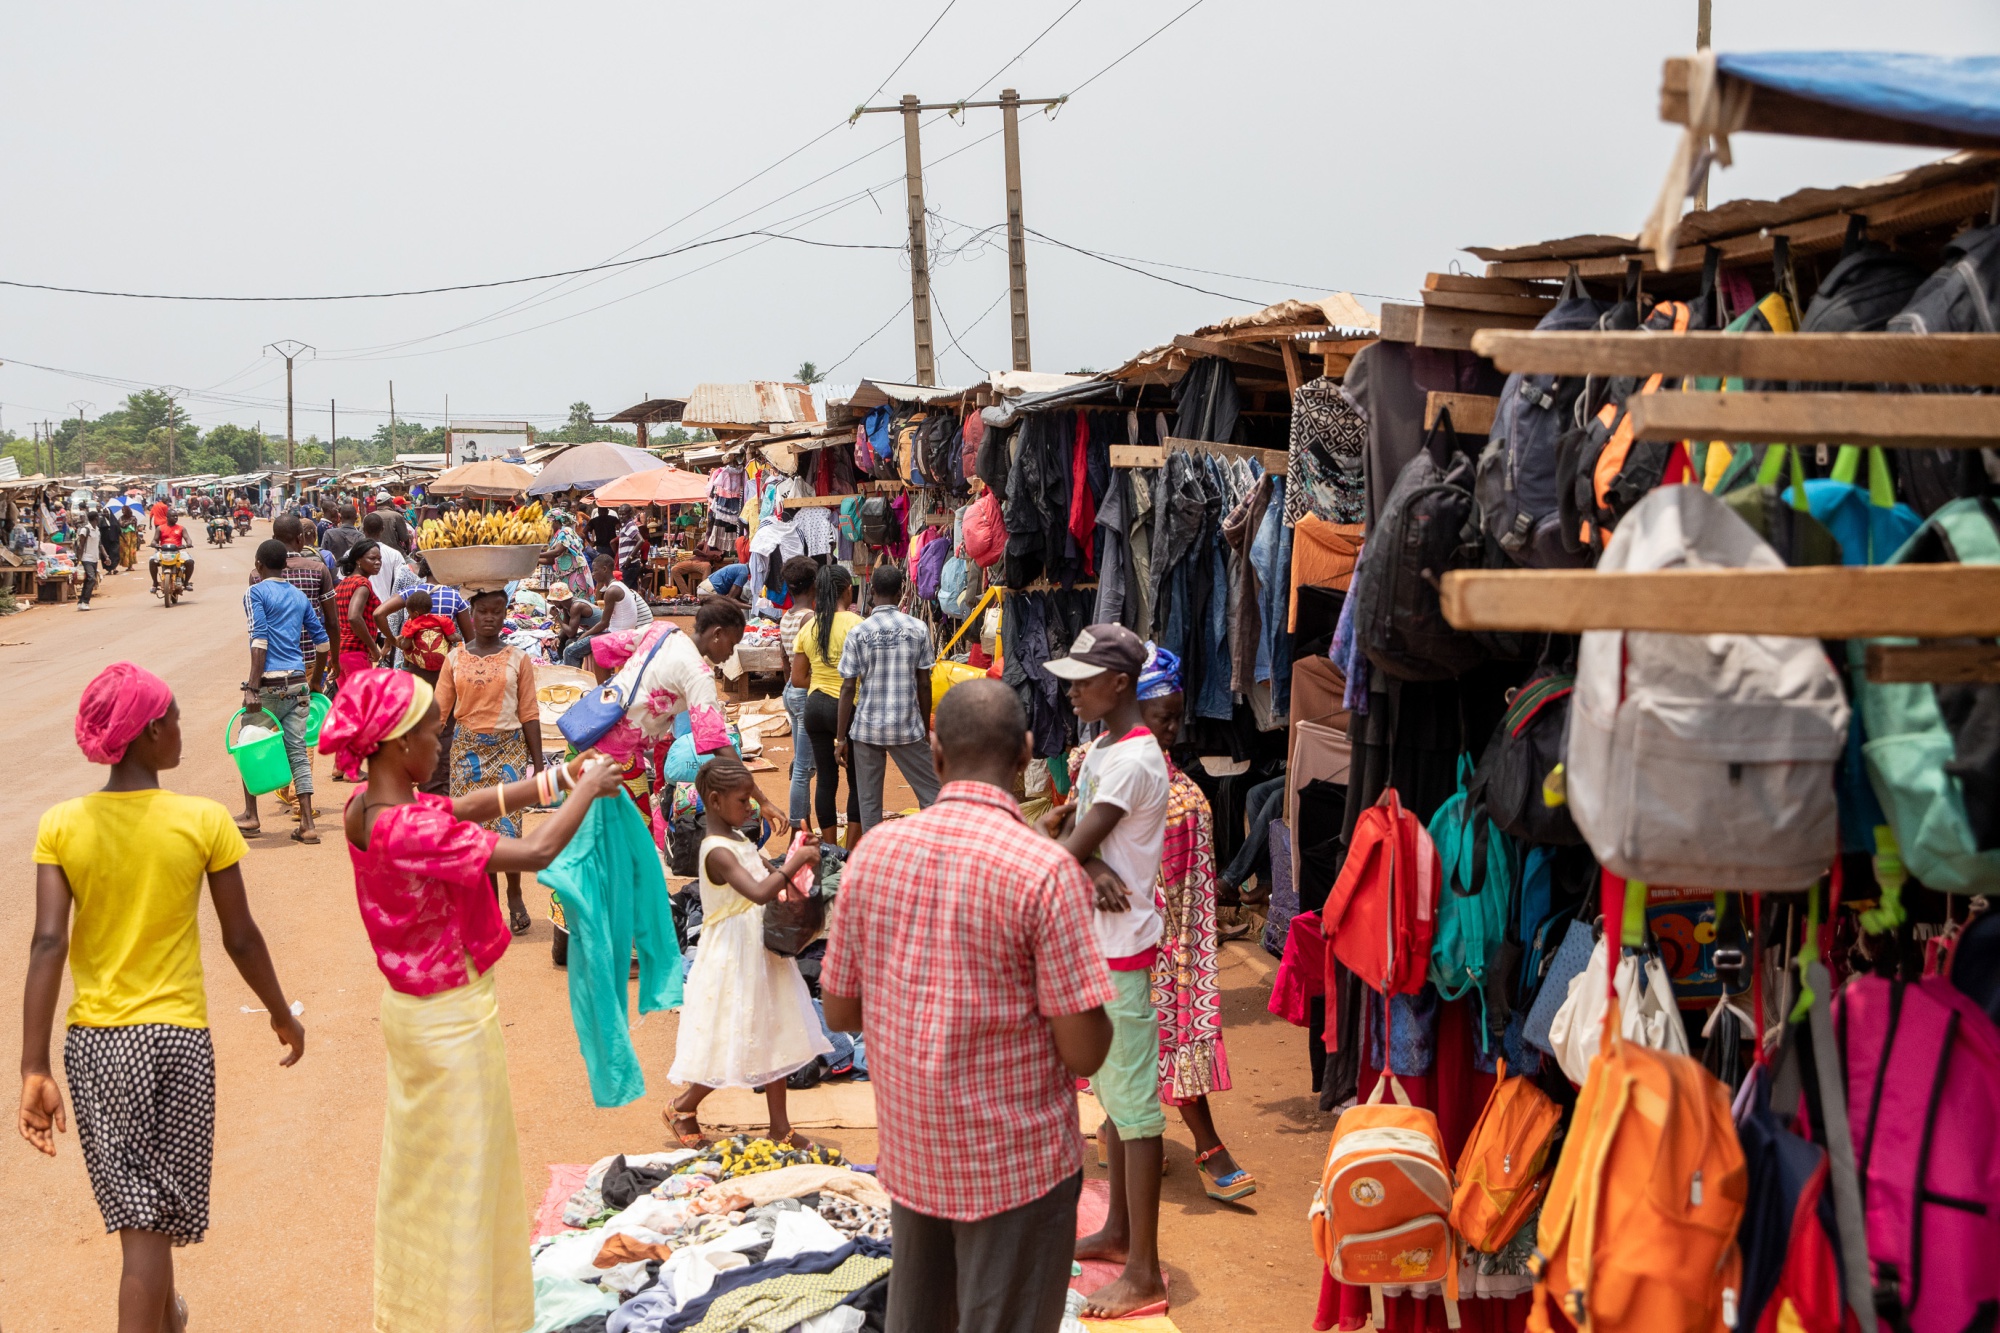 General Economy in Central African Republic’s Capital City